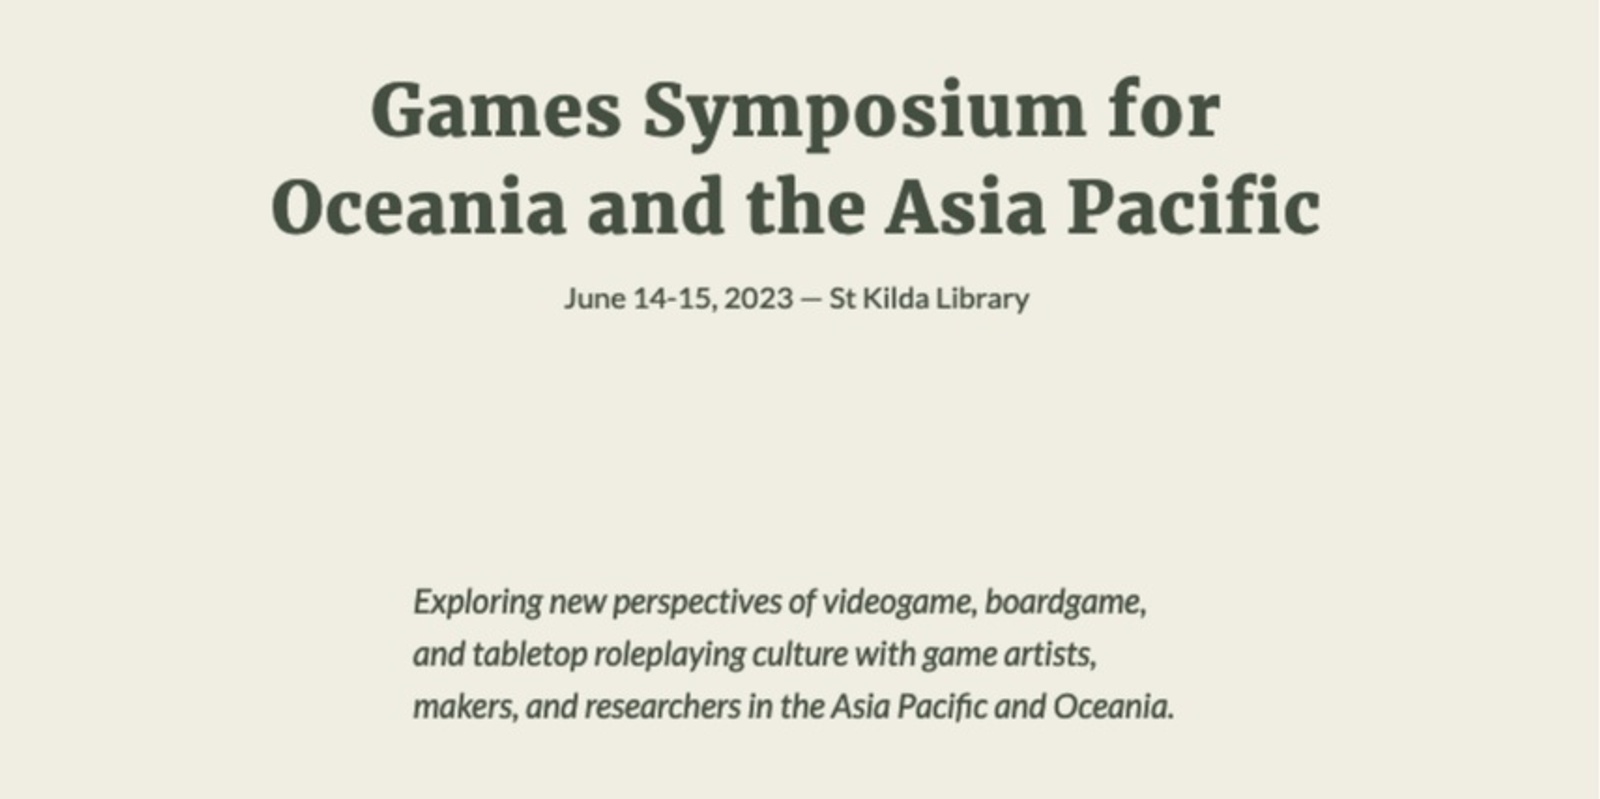 Games Symposium for Oceania and the Asia Pacific